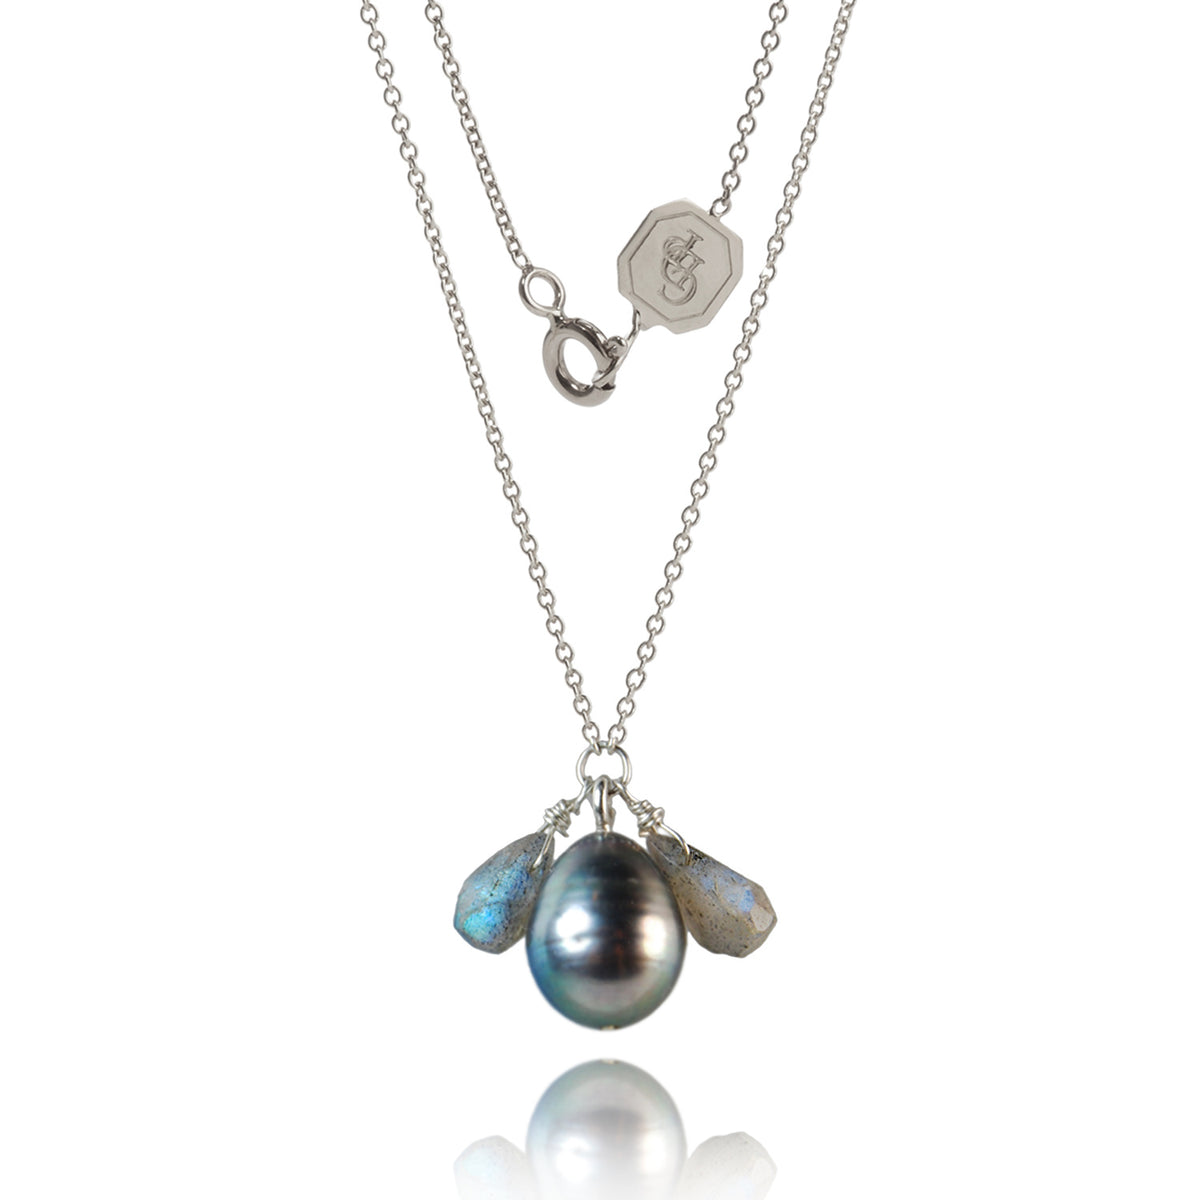 Long Silver Chain With Pearl Drop And Stone Accents